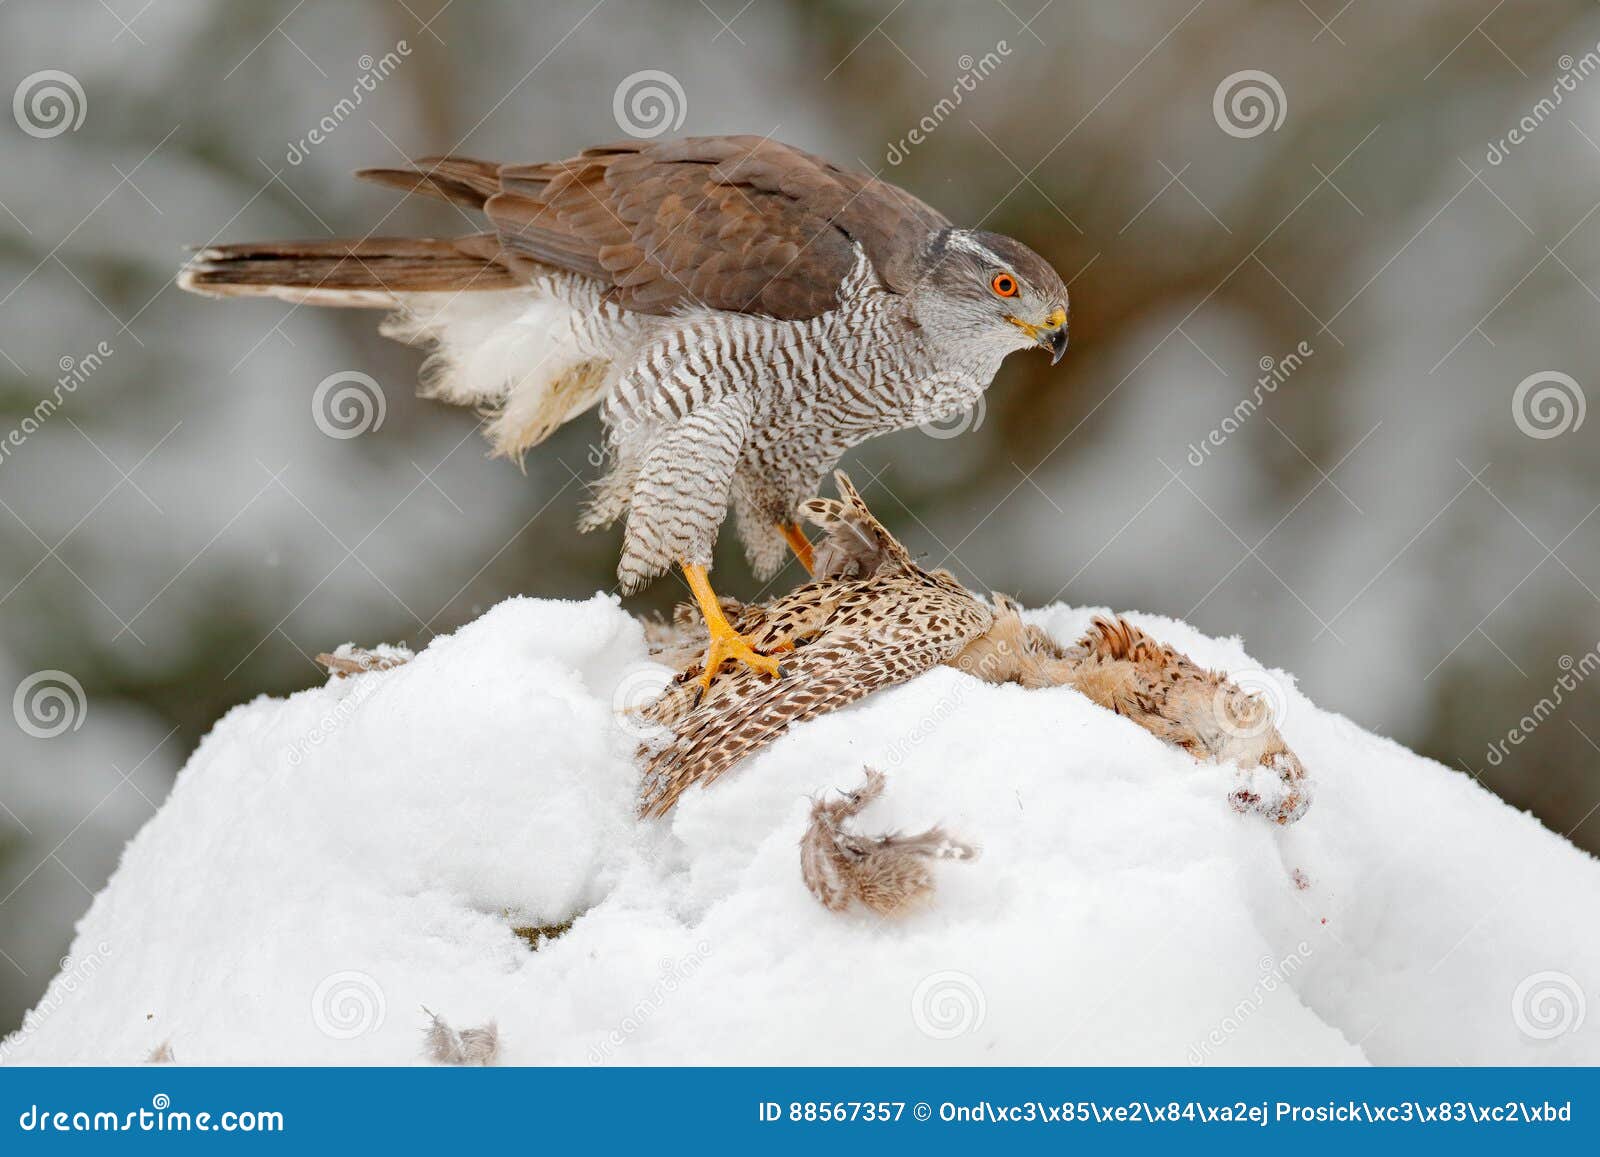 Bird with catch pheasant. Bird of prey Goshawk kill bird and sitting on the snow meadow with open wings, blurred snowy forest in b